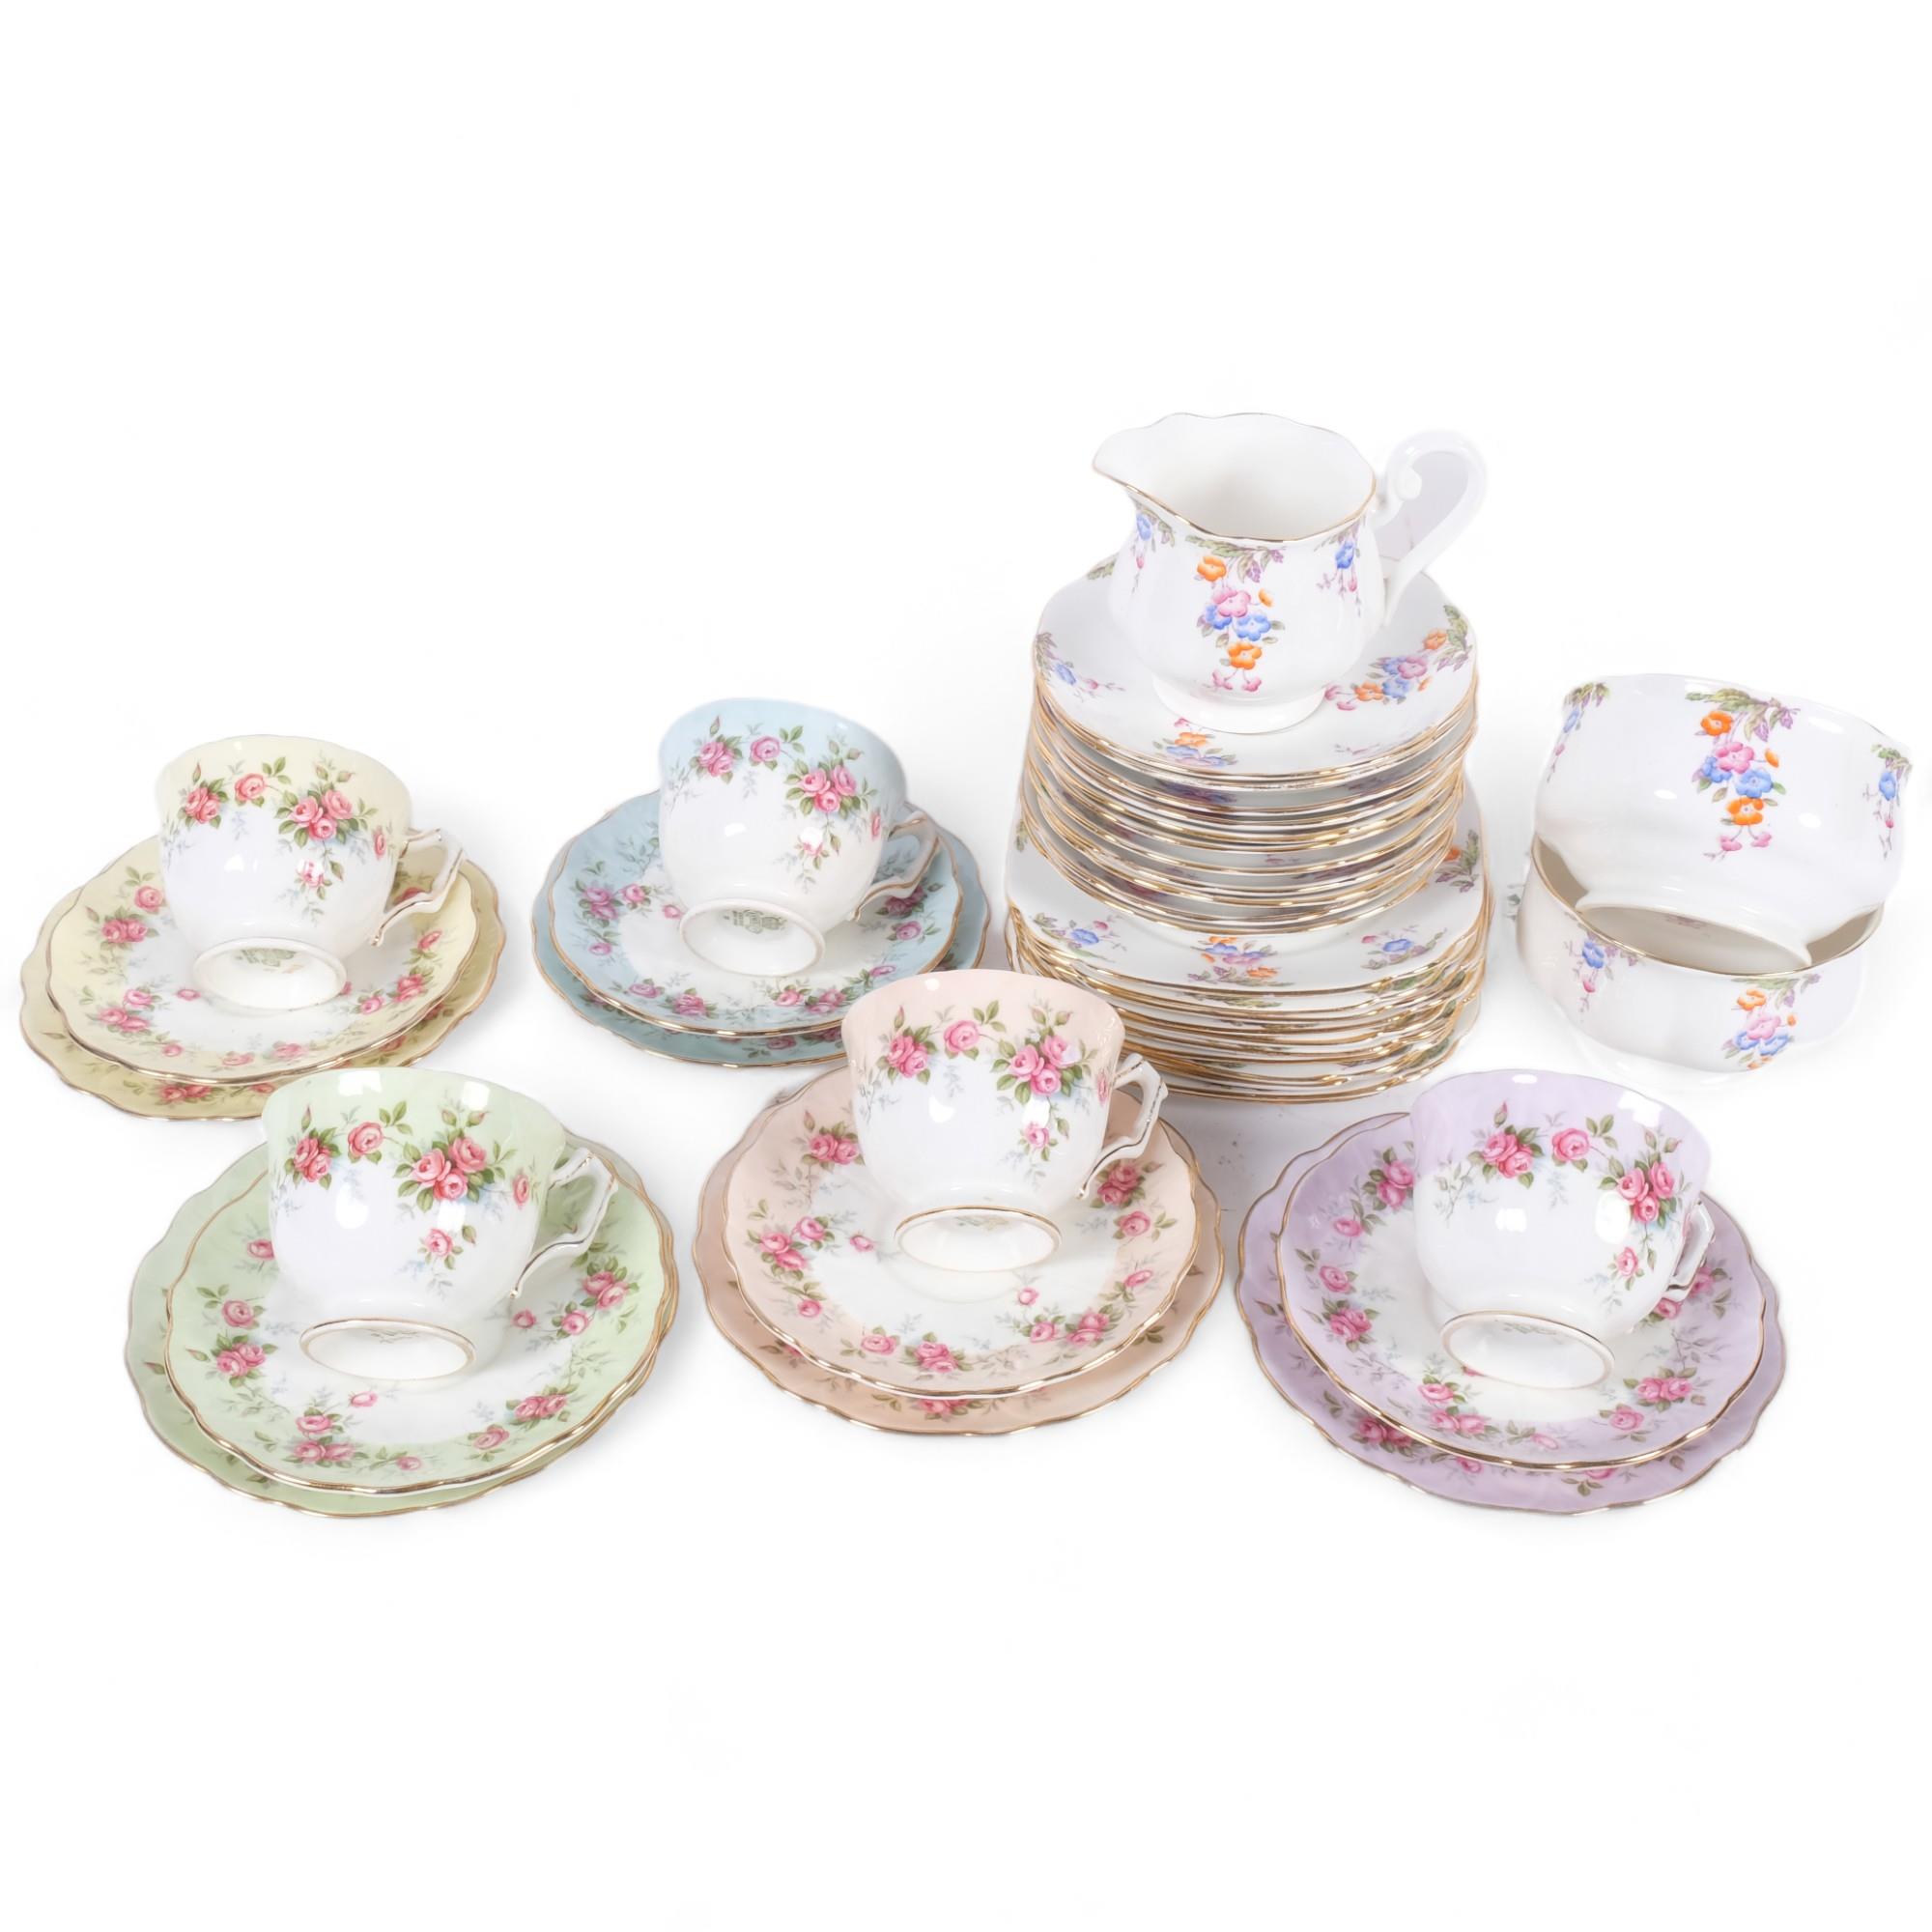 5 Aynsley cups saucers and plates with rosebud decoration, and Royal Albert floral decorated teaware